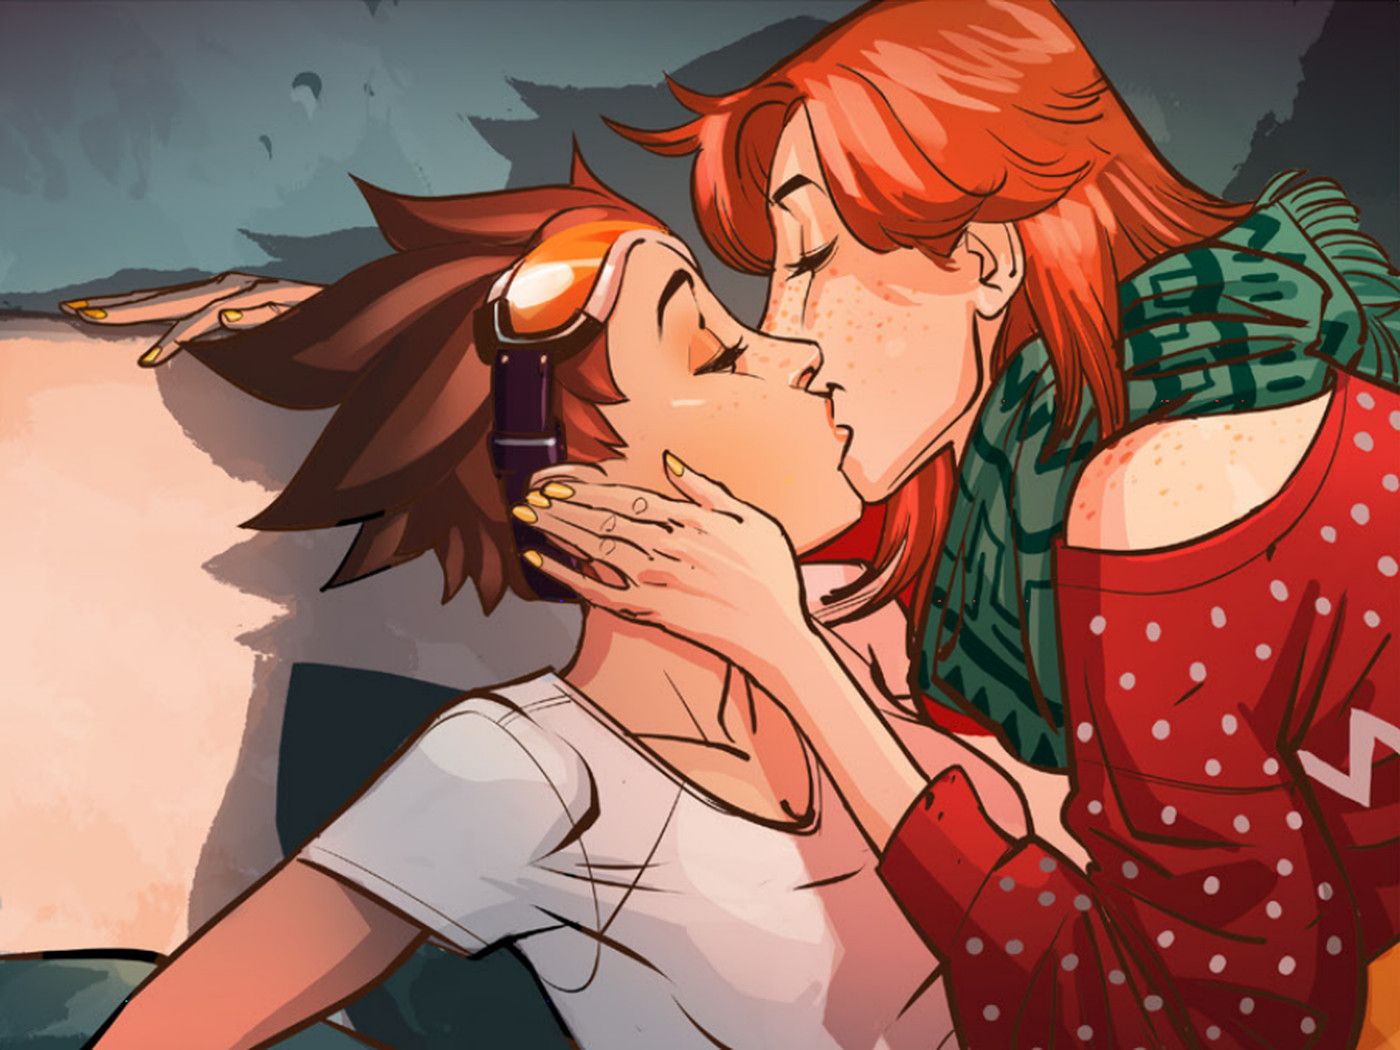 Overwatch's new comic confirms game's first queer character